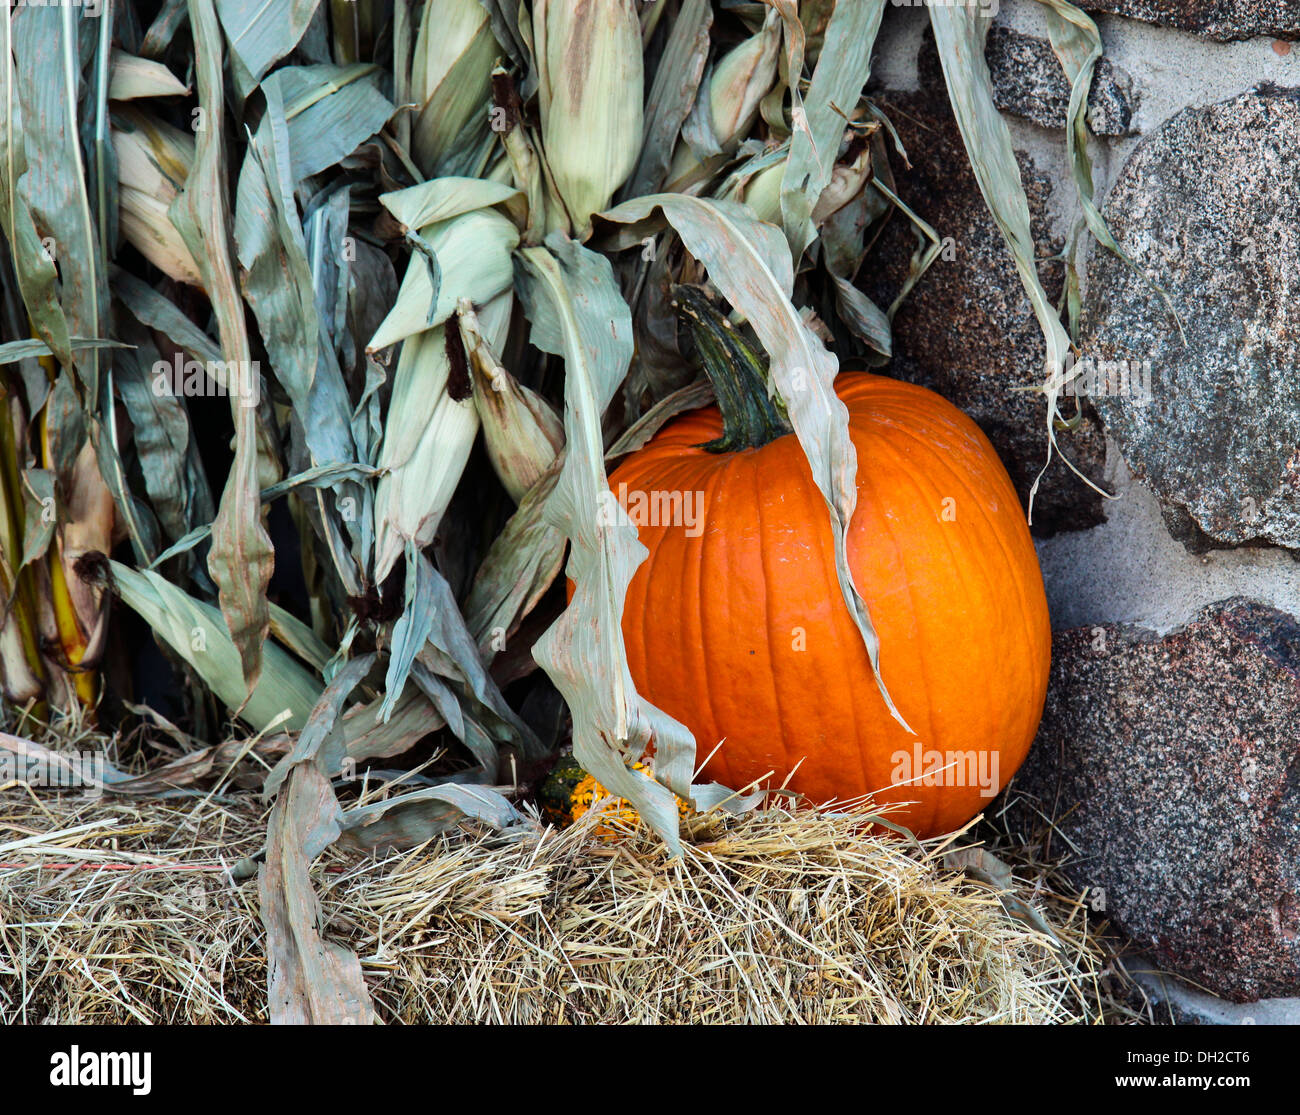 Pumpkin and corn stalks on a bale of hay against a stone wall. Stock Photo